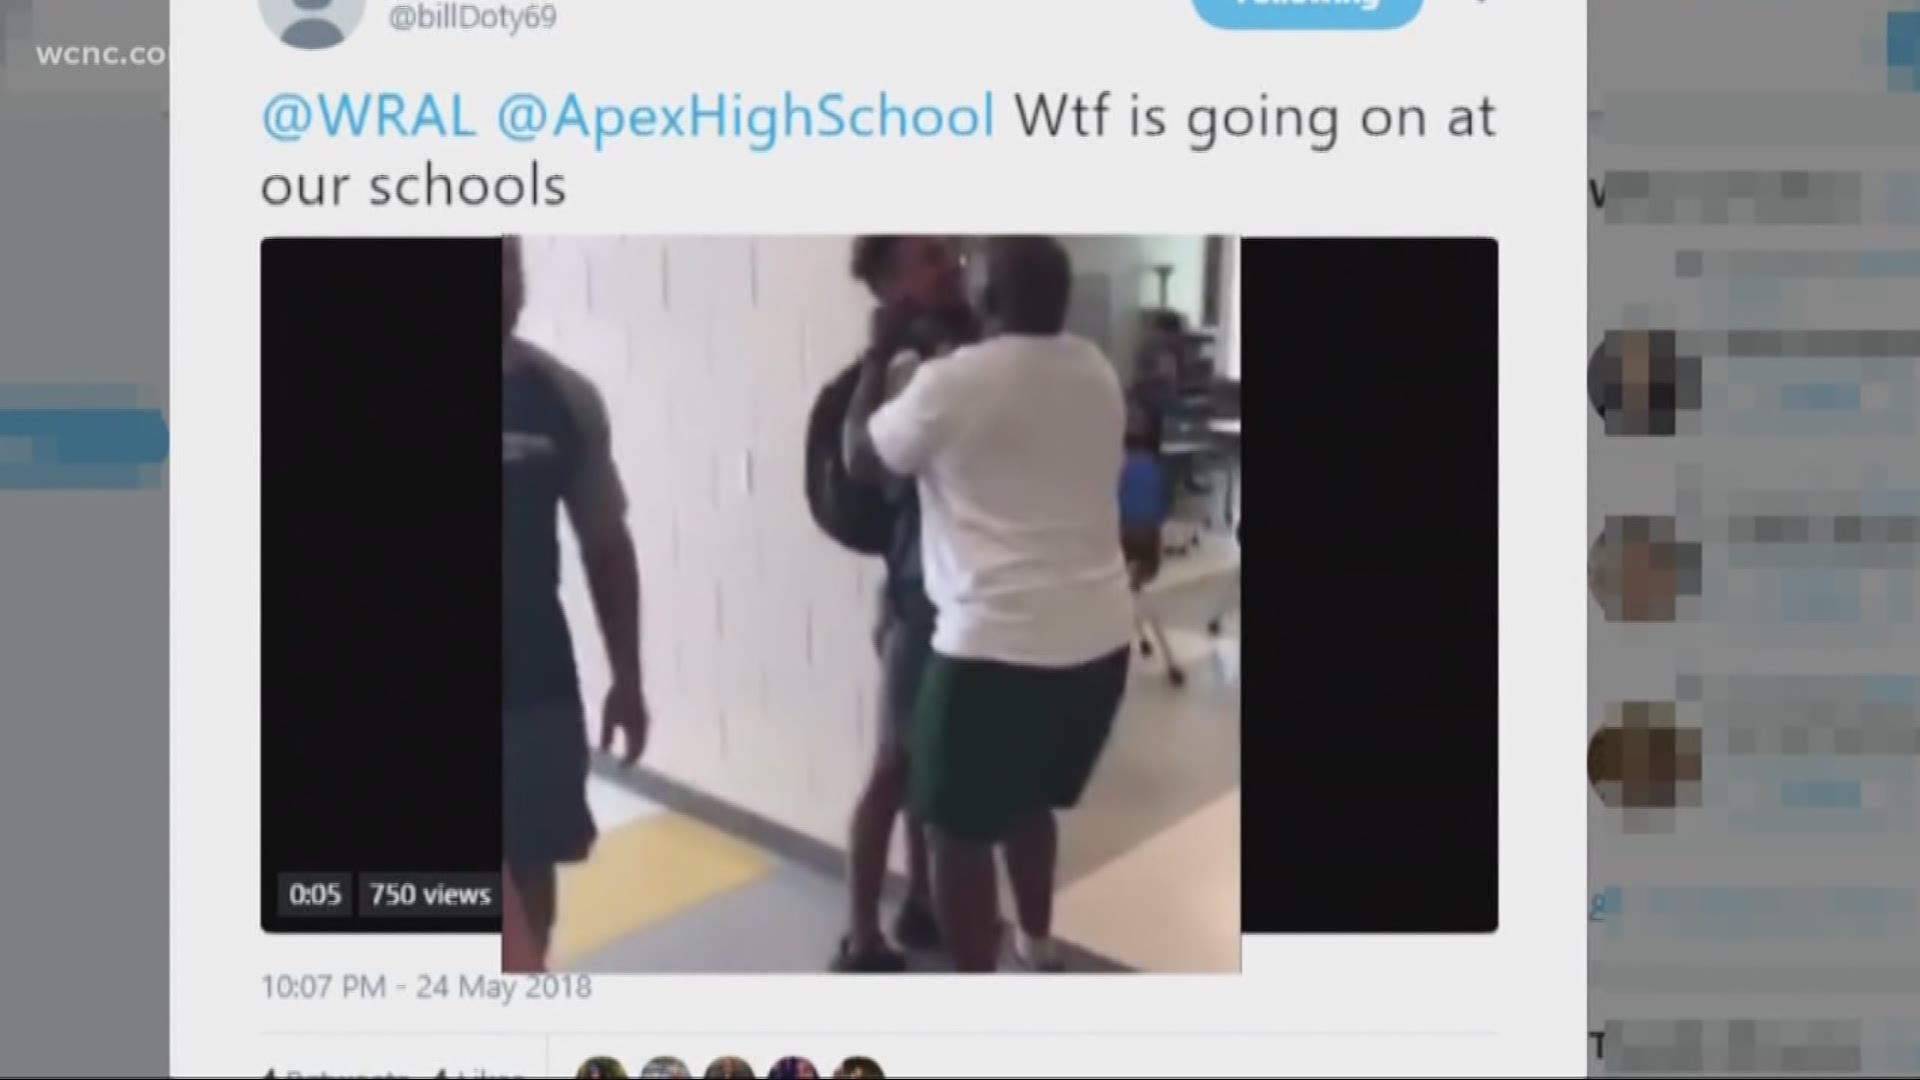 A high school teacher in North Carolina has been suspended after a video surfaced on social media that appears to show him choking a student, a spokesperson with the school district said Friday.